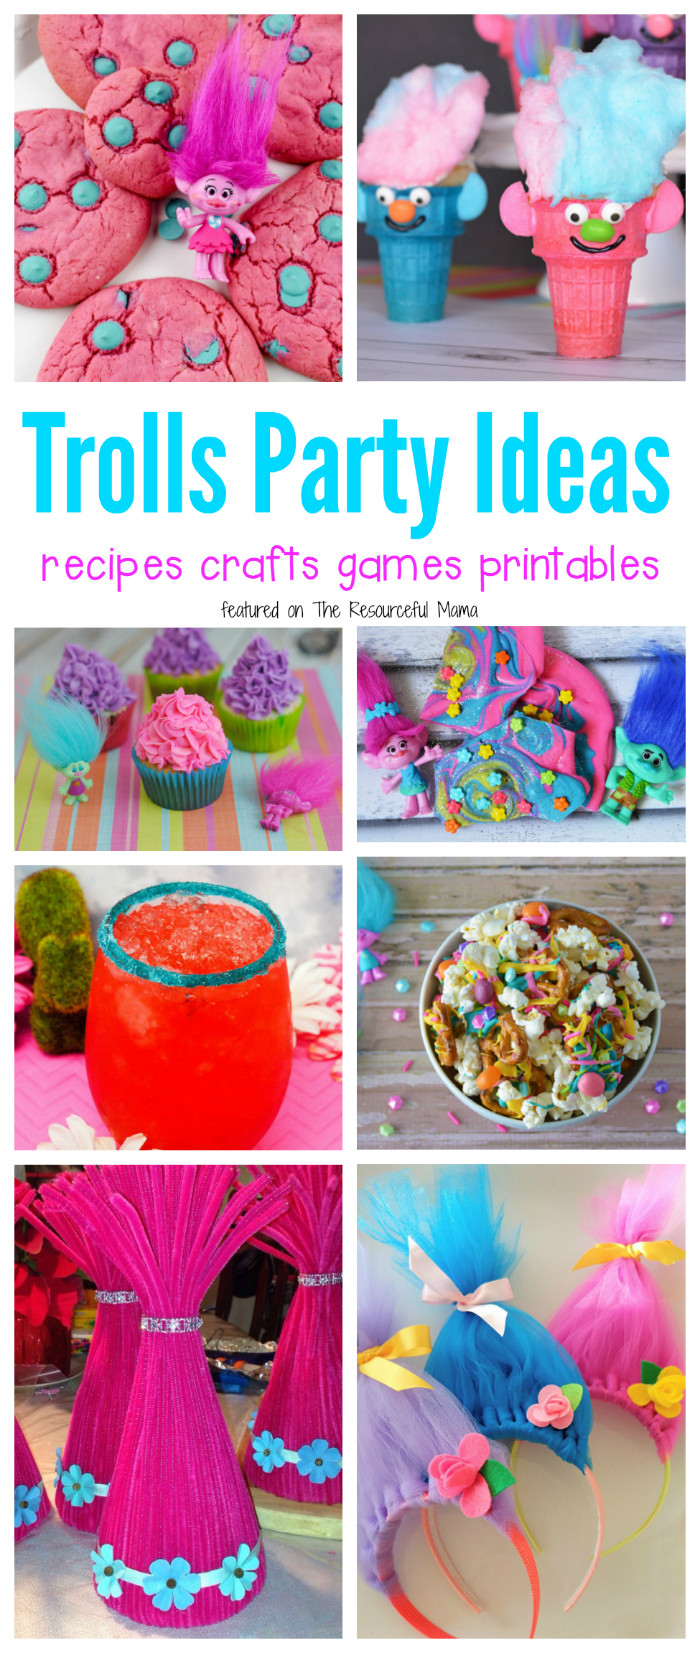 Troll Birthday Party Food Ideas
 Pin on The Resourceful Mama